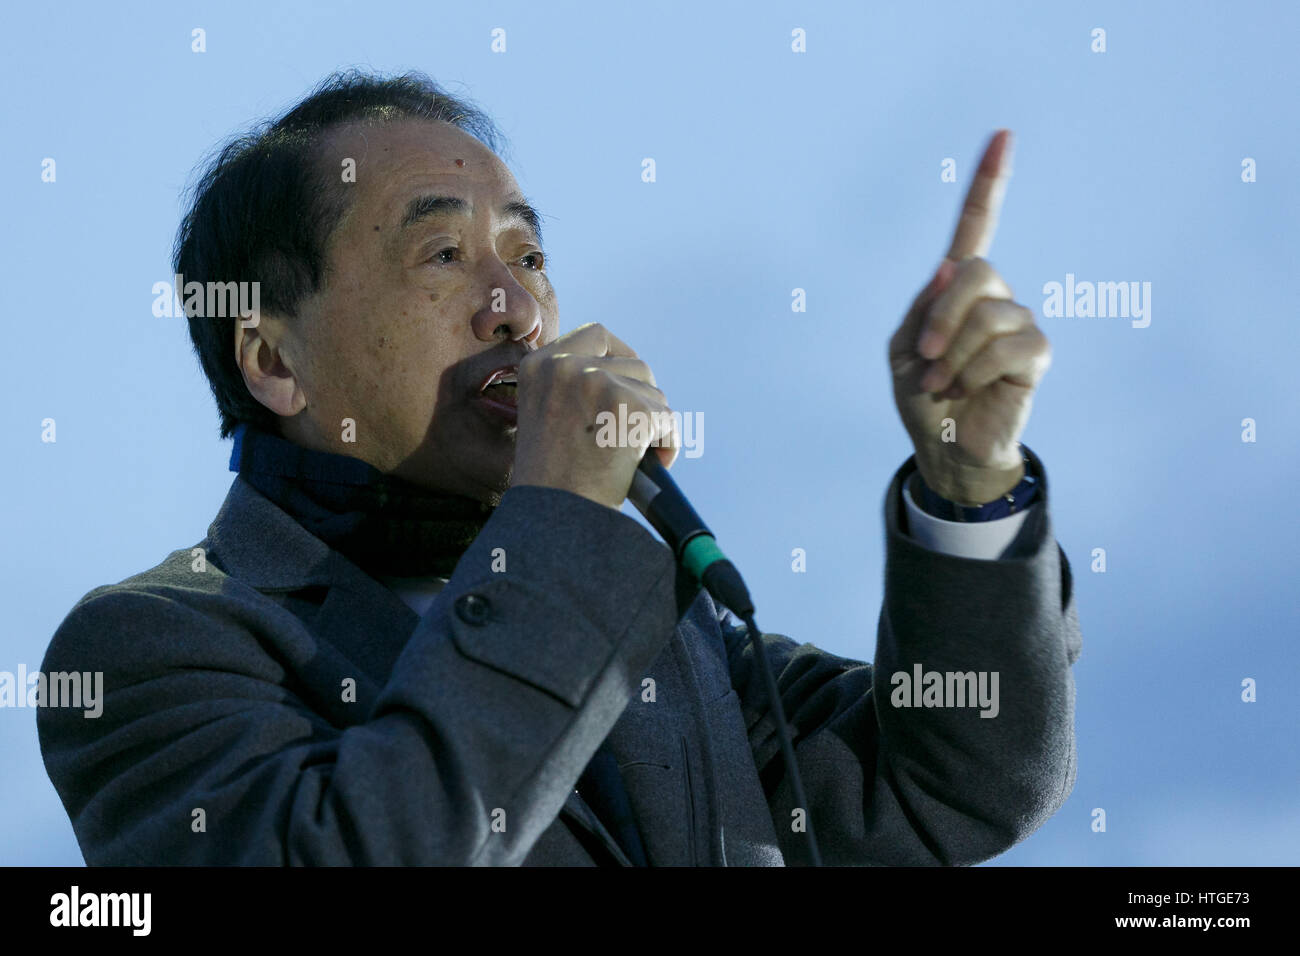 Tokyo, Japan. 11th March 2017.  Japan's former Prime Minister and antinuclear advocate Naoto Kan makes a speech outside the National Diet Building during a rally held by the Metropolitan Coalition Against Nukes on March 11, 2017, Tokyo, Japan. The protest comes during the sixth anniversary of the Great East Japan Earthquake and Tsunami disaster that led to the outbreak of the Fukushima nuclear crisis. Credit: Rodrigo Reyes Marin/AFLO/Alamy Live News Stock Photo